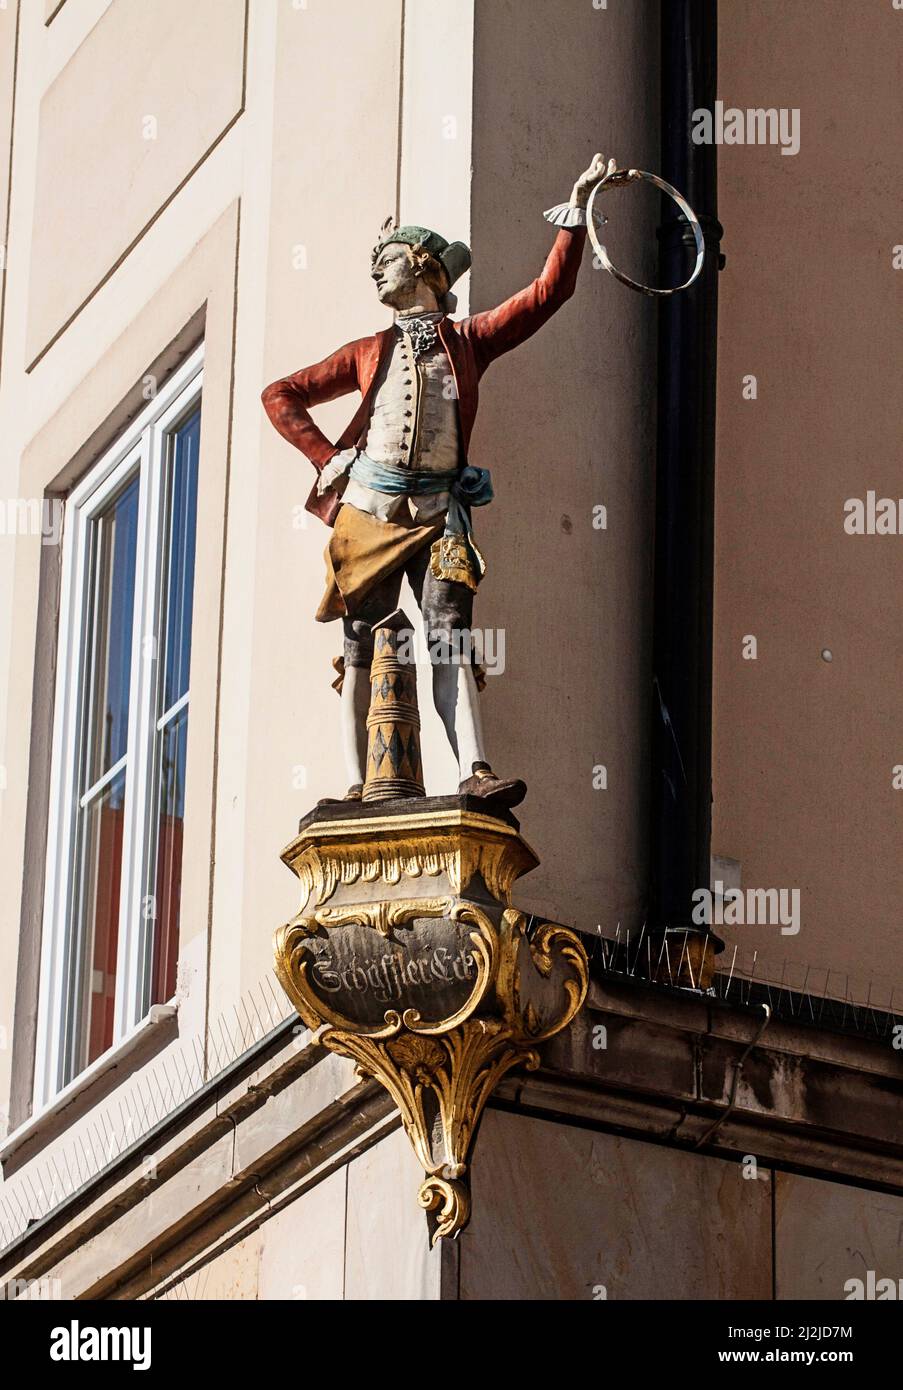 Munich, Cooper's corner, traditional cooper figure with the ancient costume of the barrel maker confraternity in city center Stock Photo